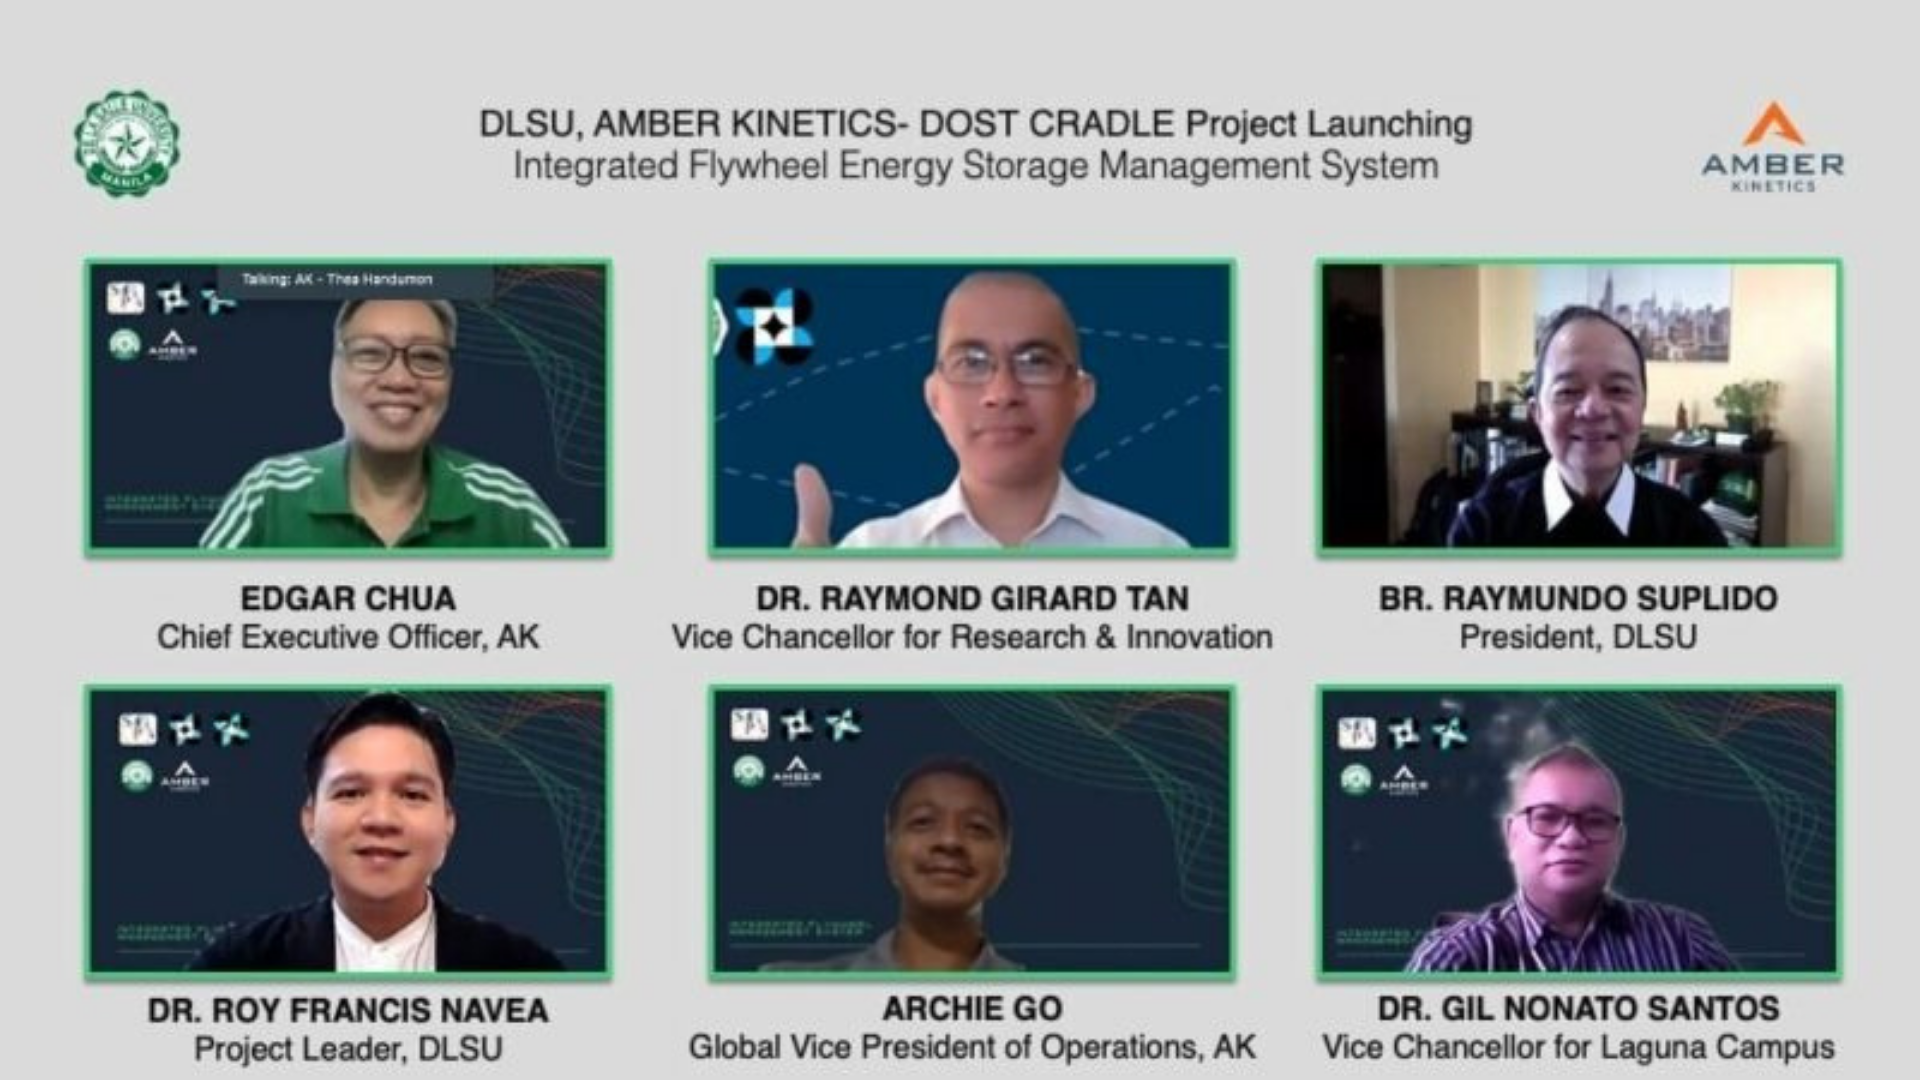 DLSU and Amber Kinetics launch Flywheel Storage Management System Project with DOST